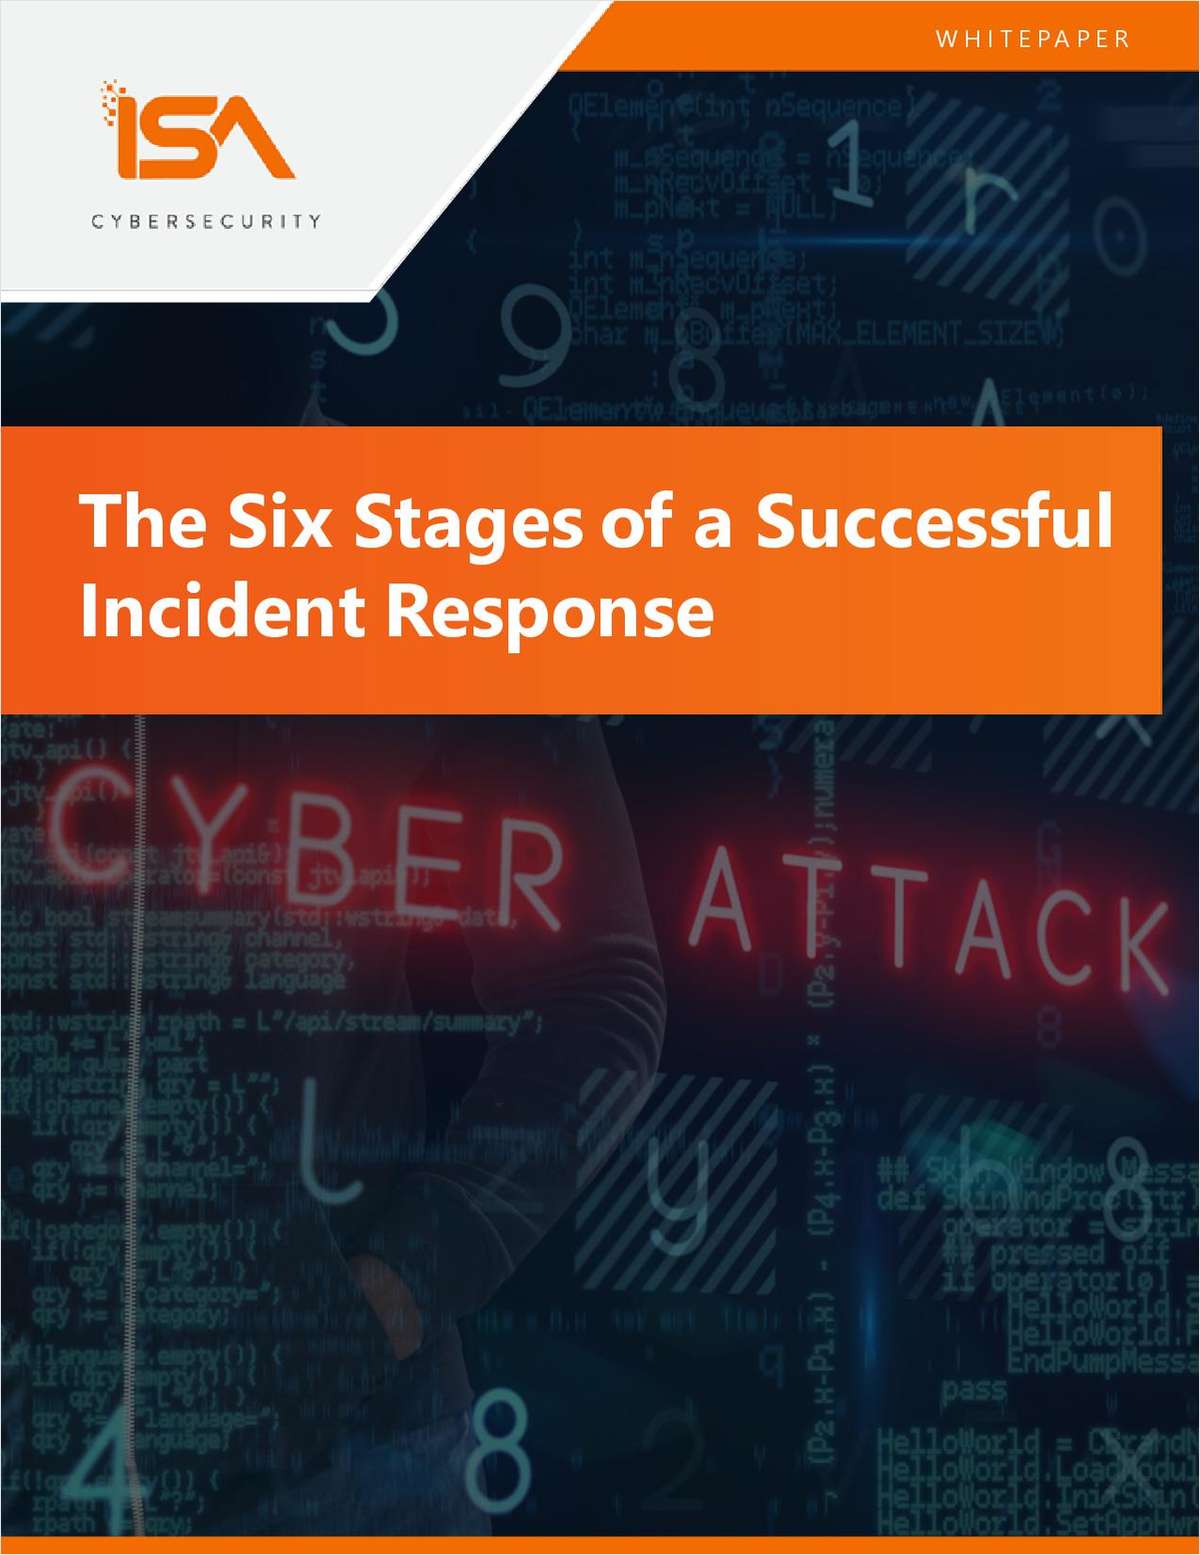 The Six Stages of a Successful Incident Response